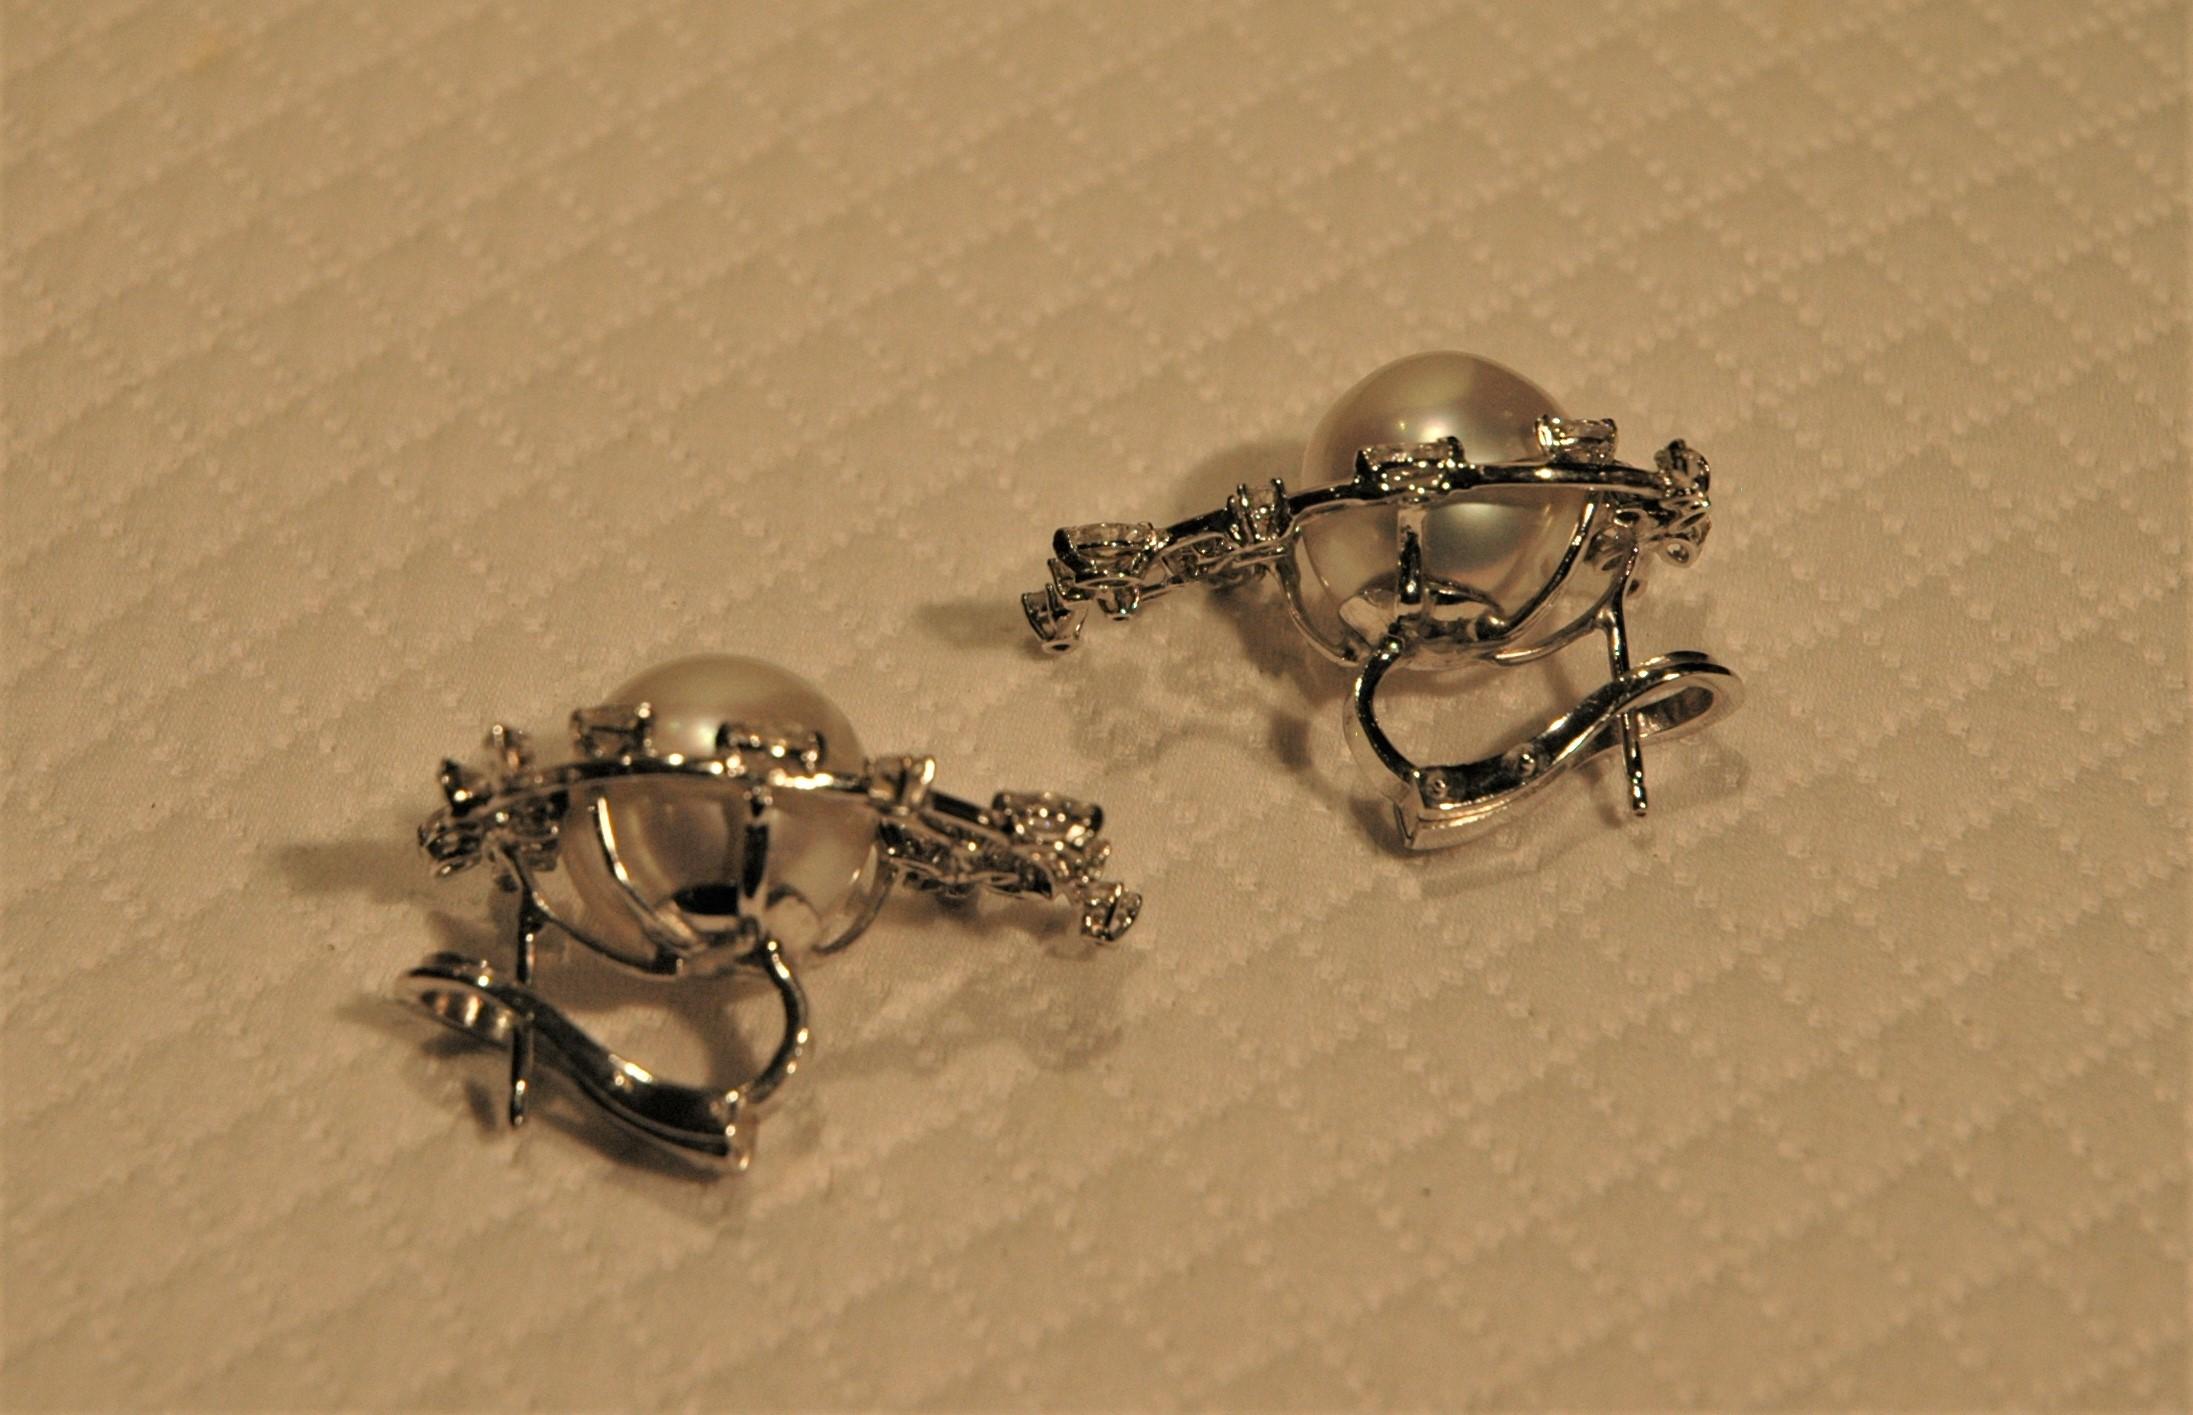 Stud Earrings 18 Kt White Gold, 2.89 Carats Diamonds and White Australian Pearls For Sale 1